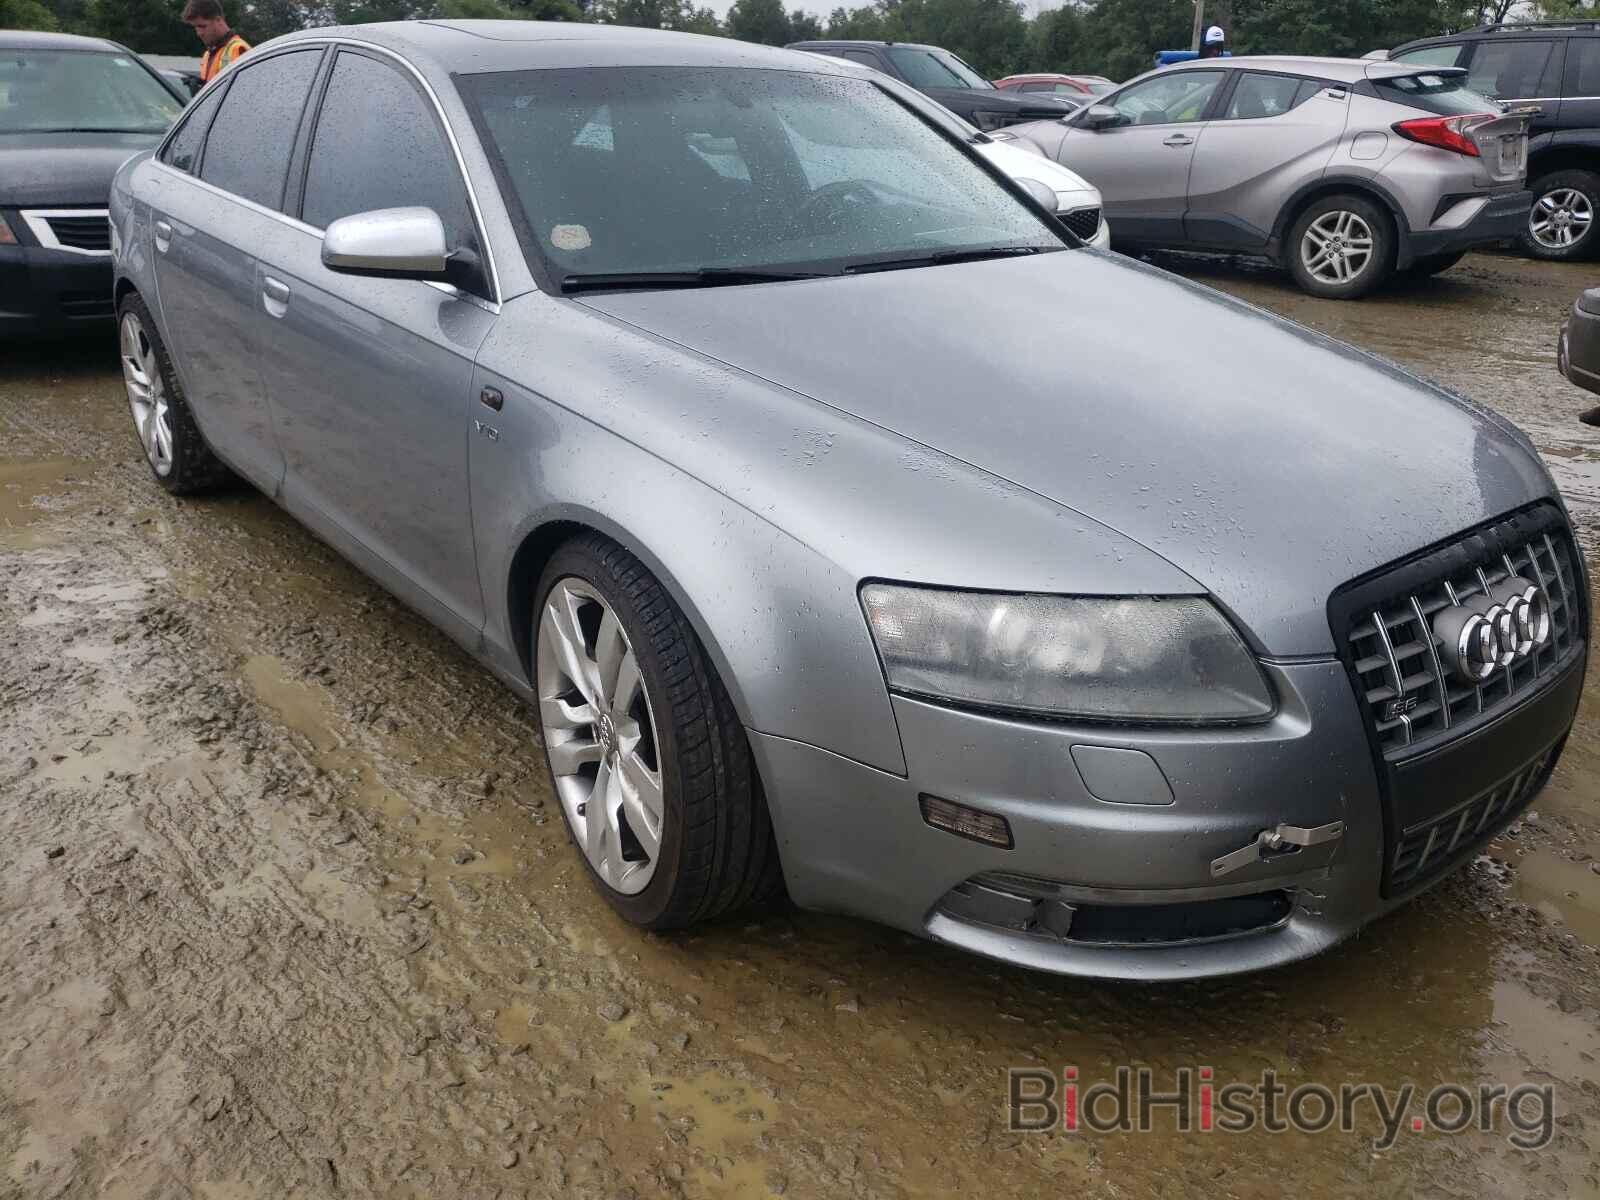 Photo WAUGN74F57N148517 - AUDI S6/RS6 2007